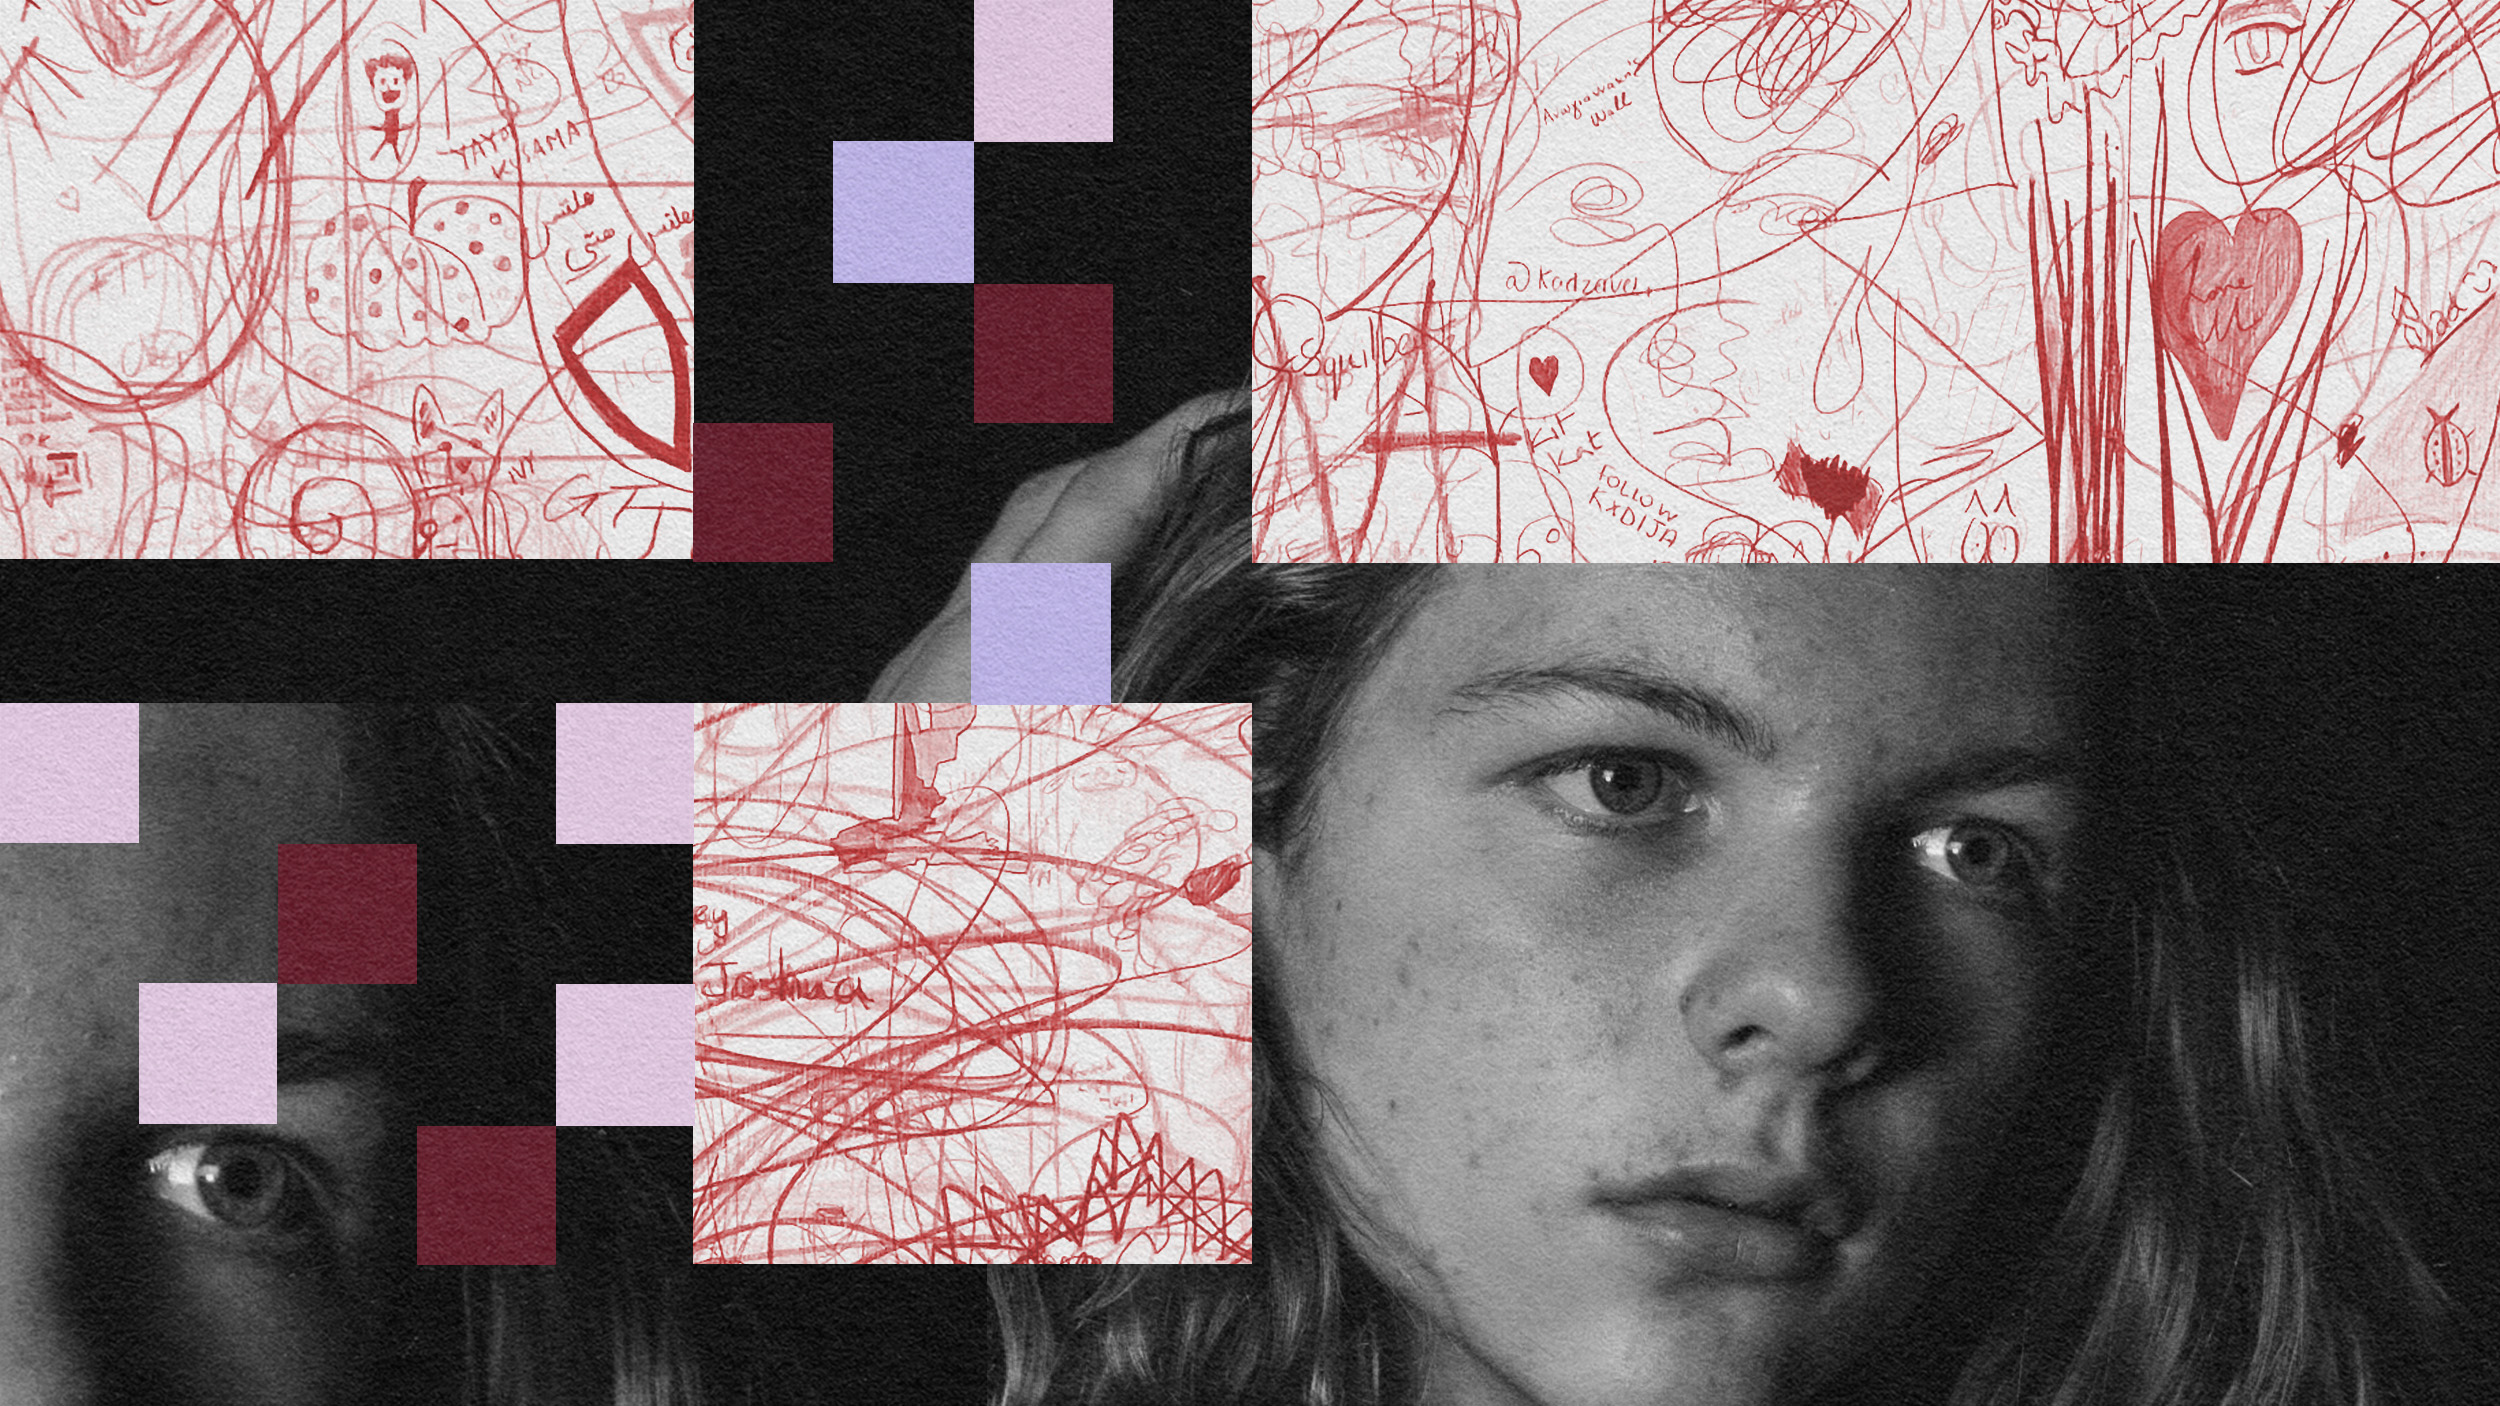 Collage of a young person's face with abstract red scribbles and geometric shapes symbolizing ADHD.